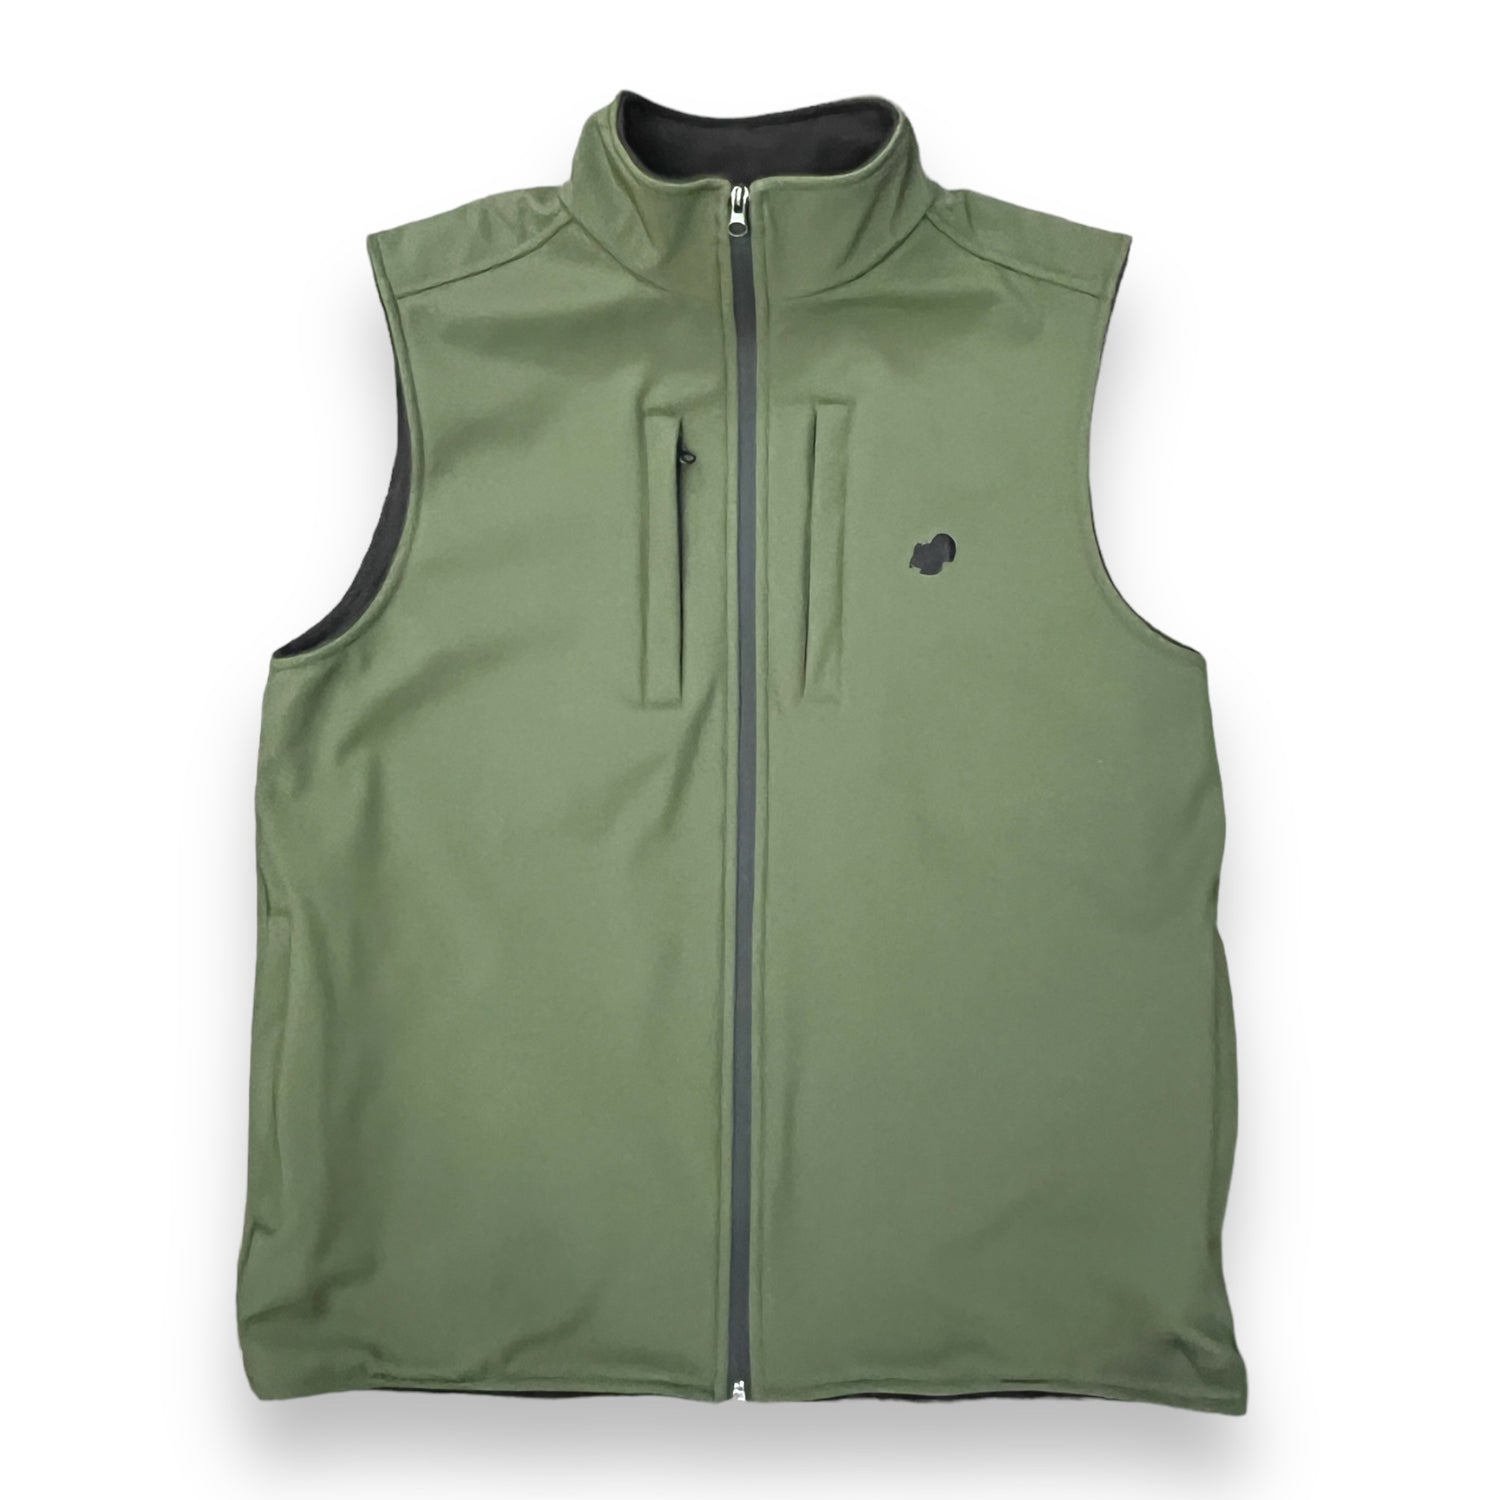 Youth Vest and Jackets